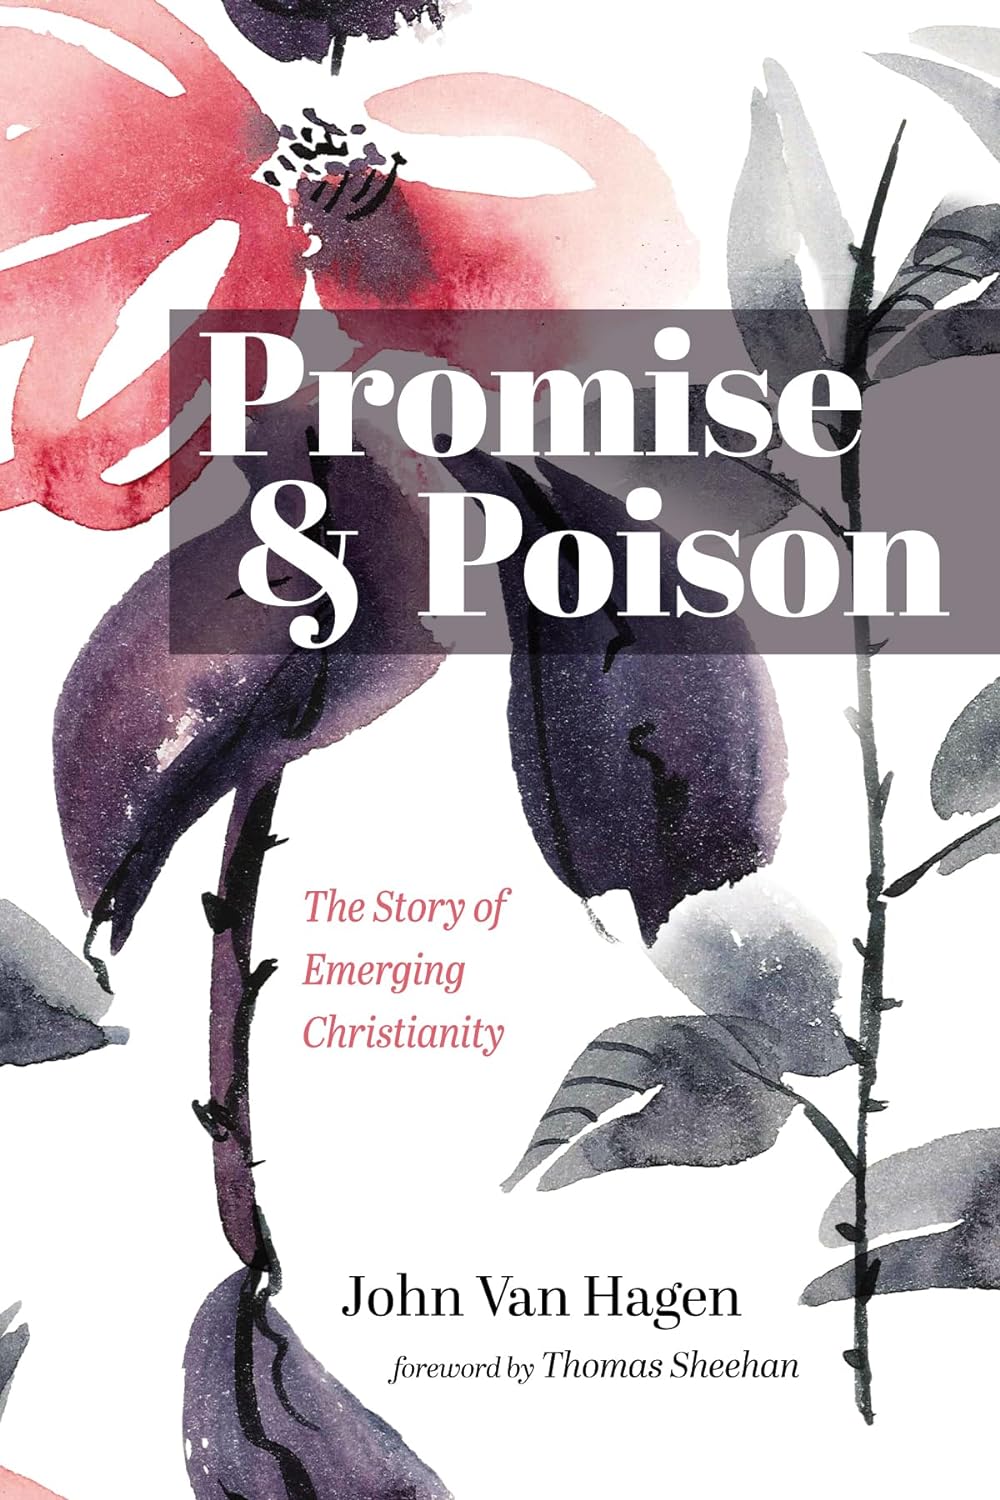 Book cover for "Promise and Poison: The Story of Emerging Christianity"